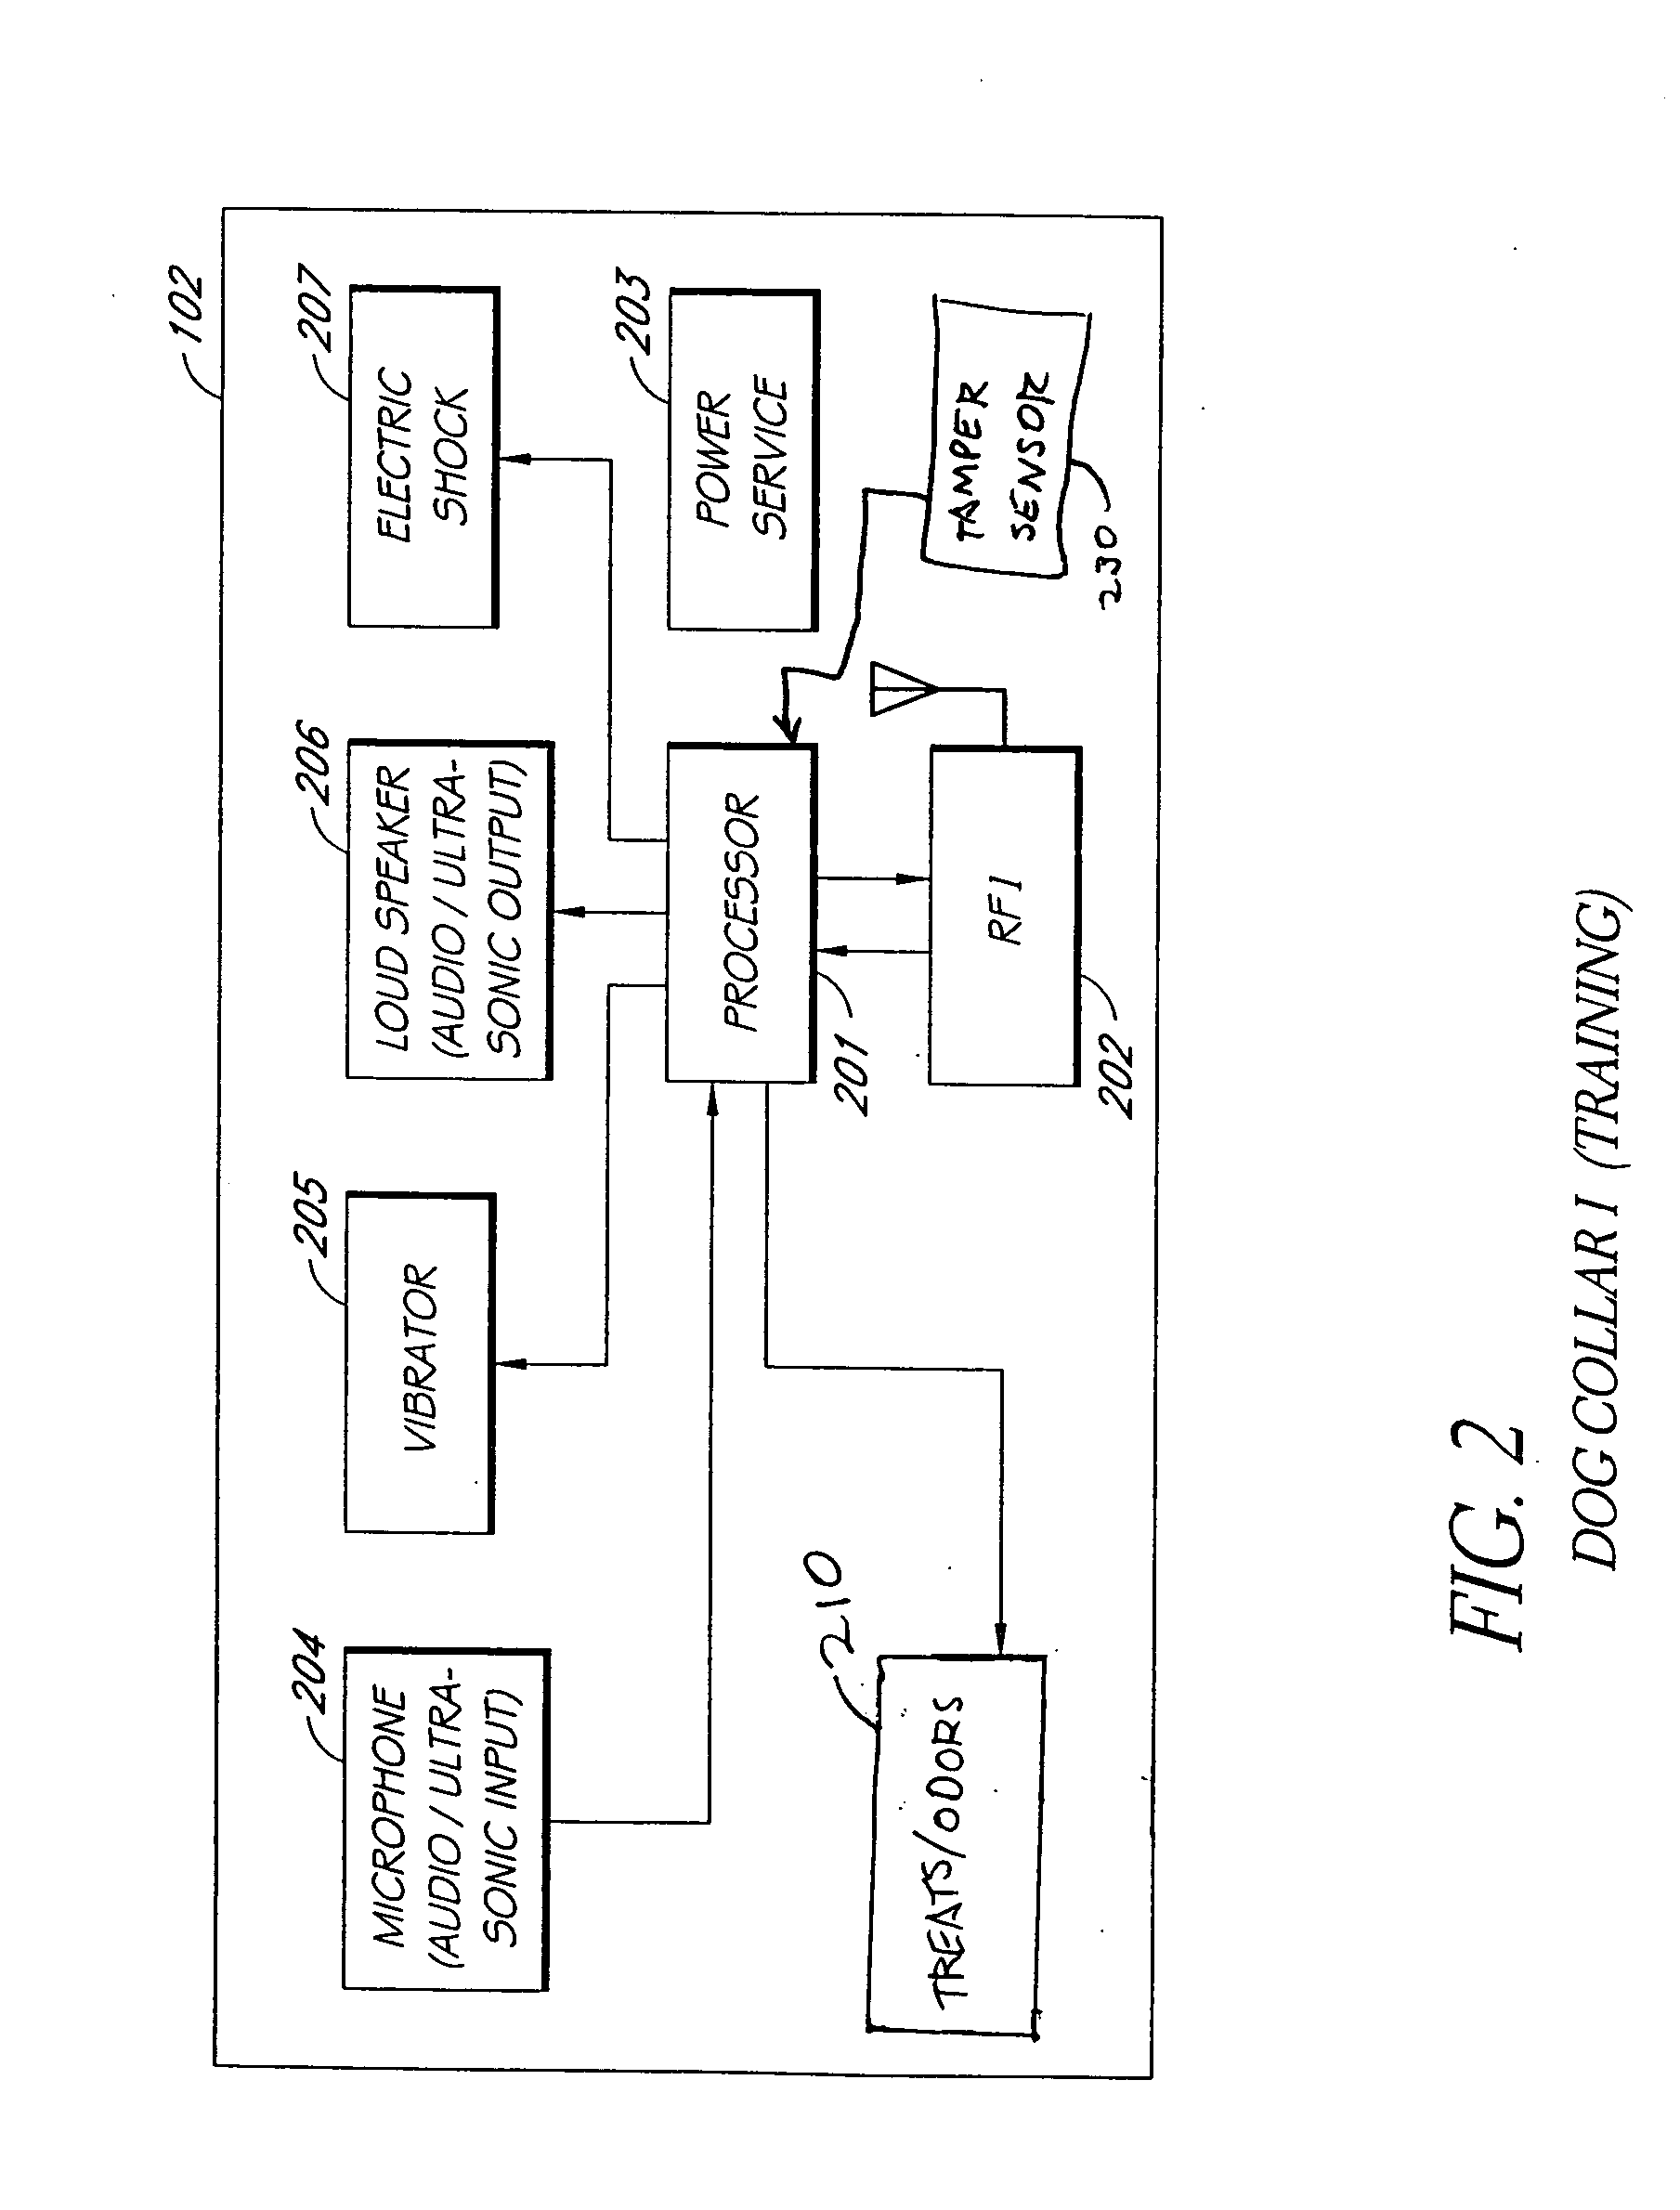 System and method for computer-controlled animal toy